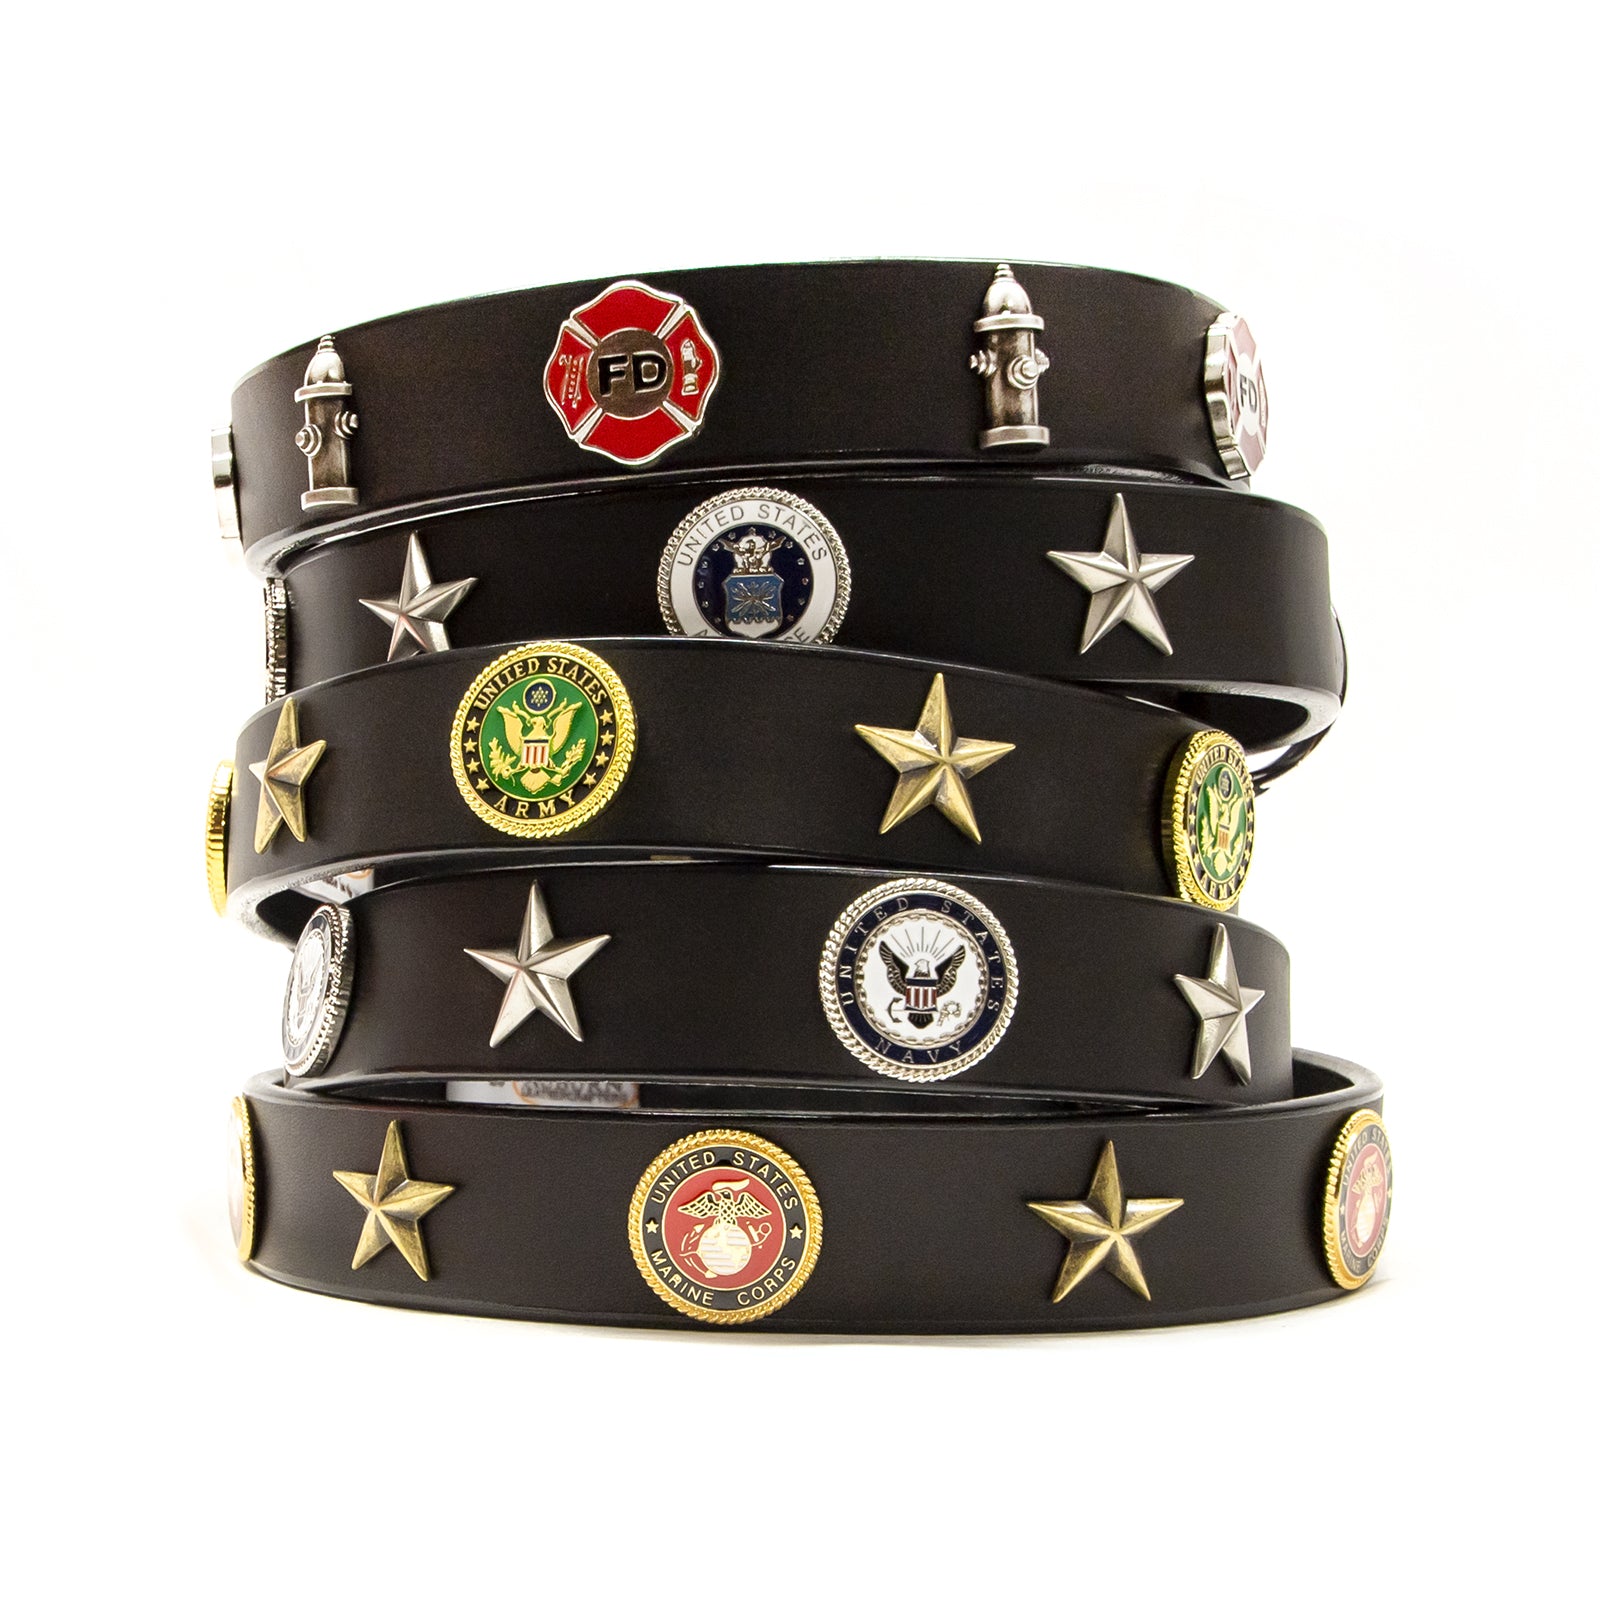 Armed Forces Leather Dog Collars